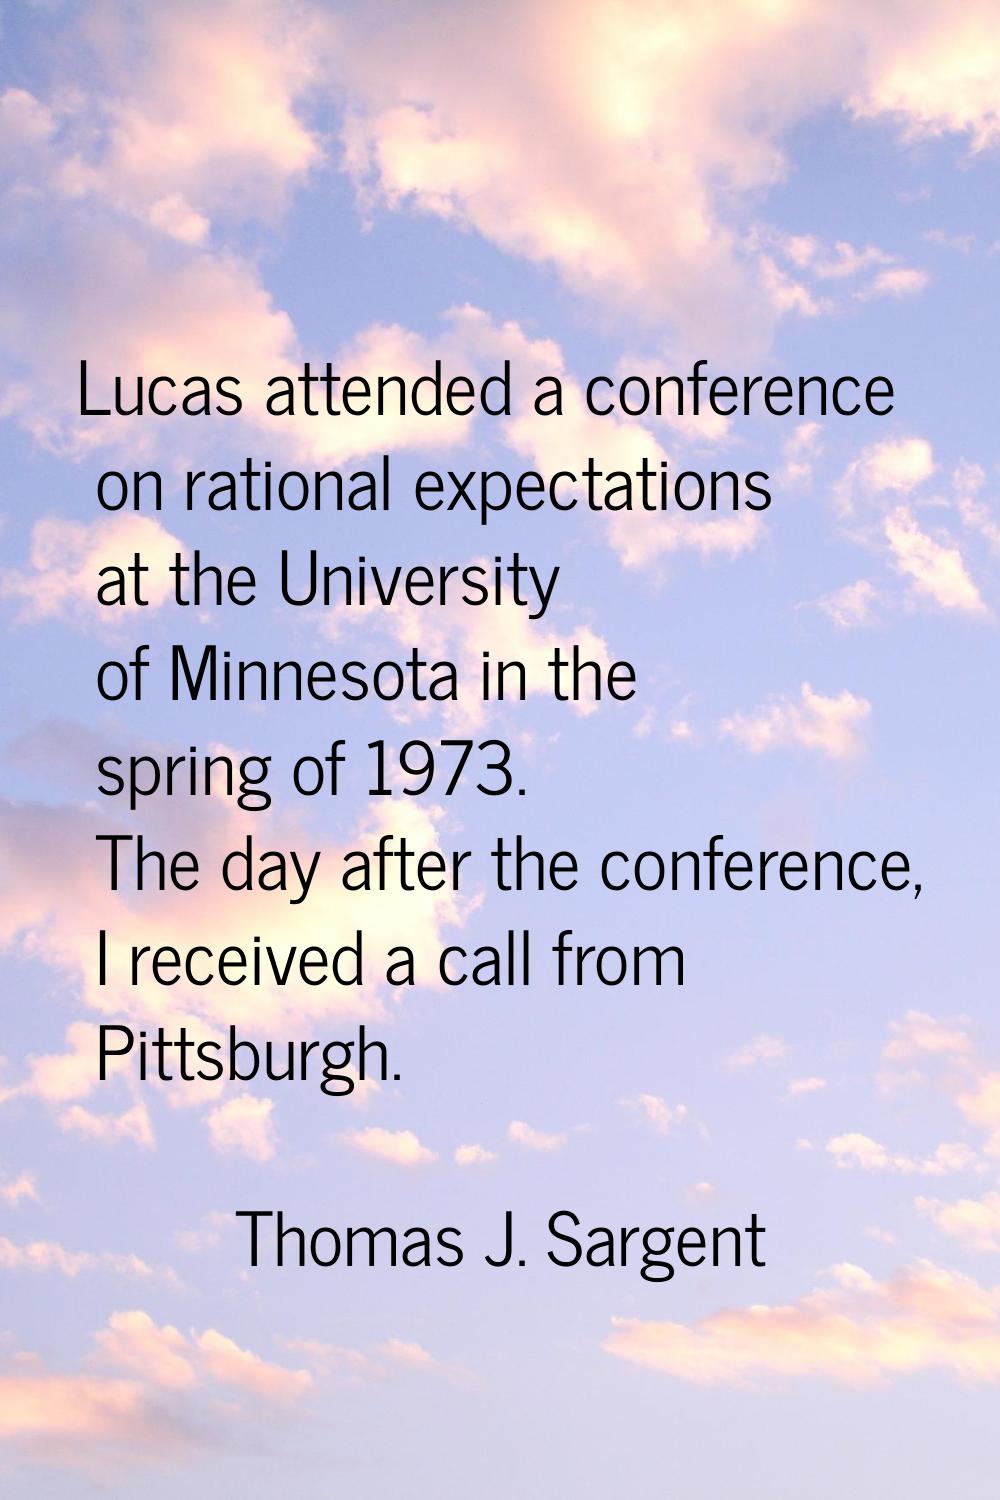 Lucas attended a conference on rational expectations at the University of Minnesota in the spring o